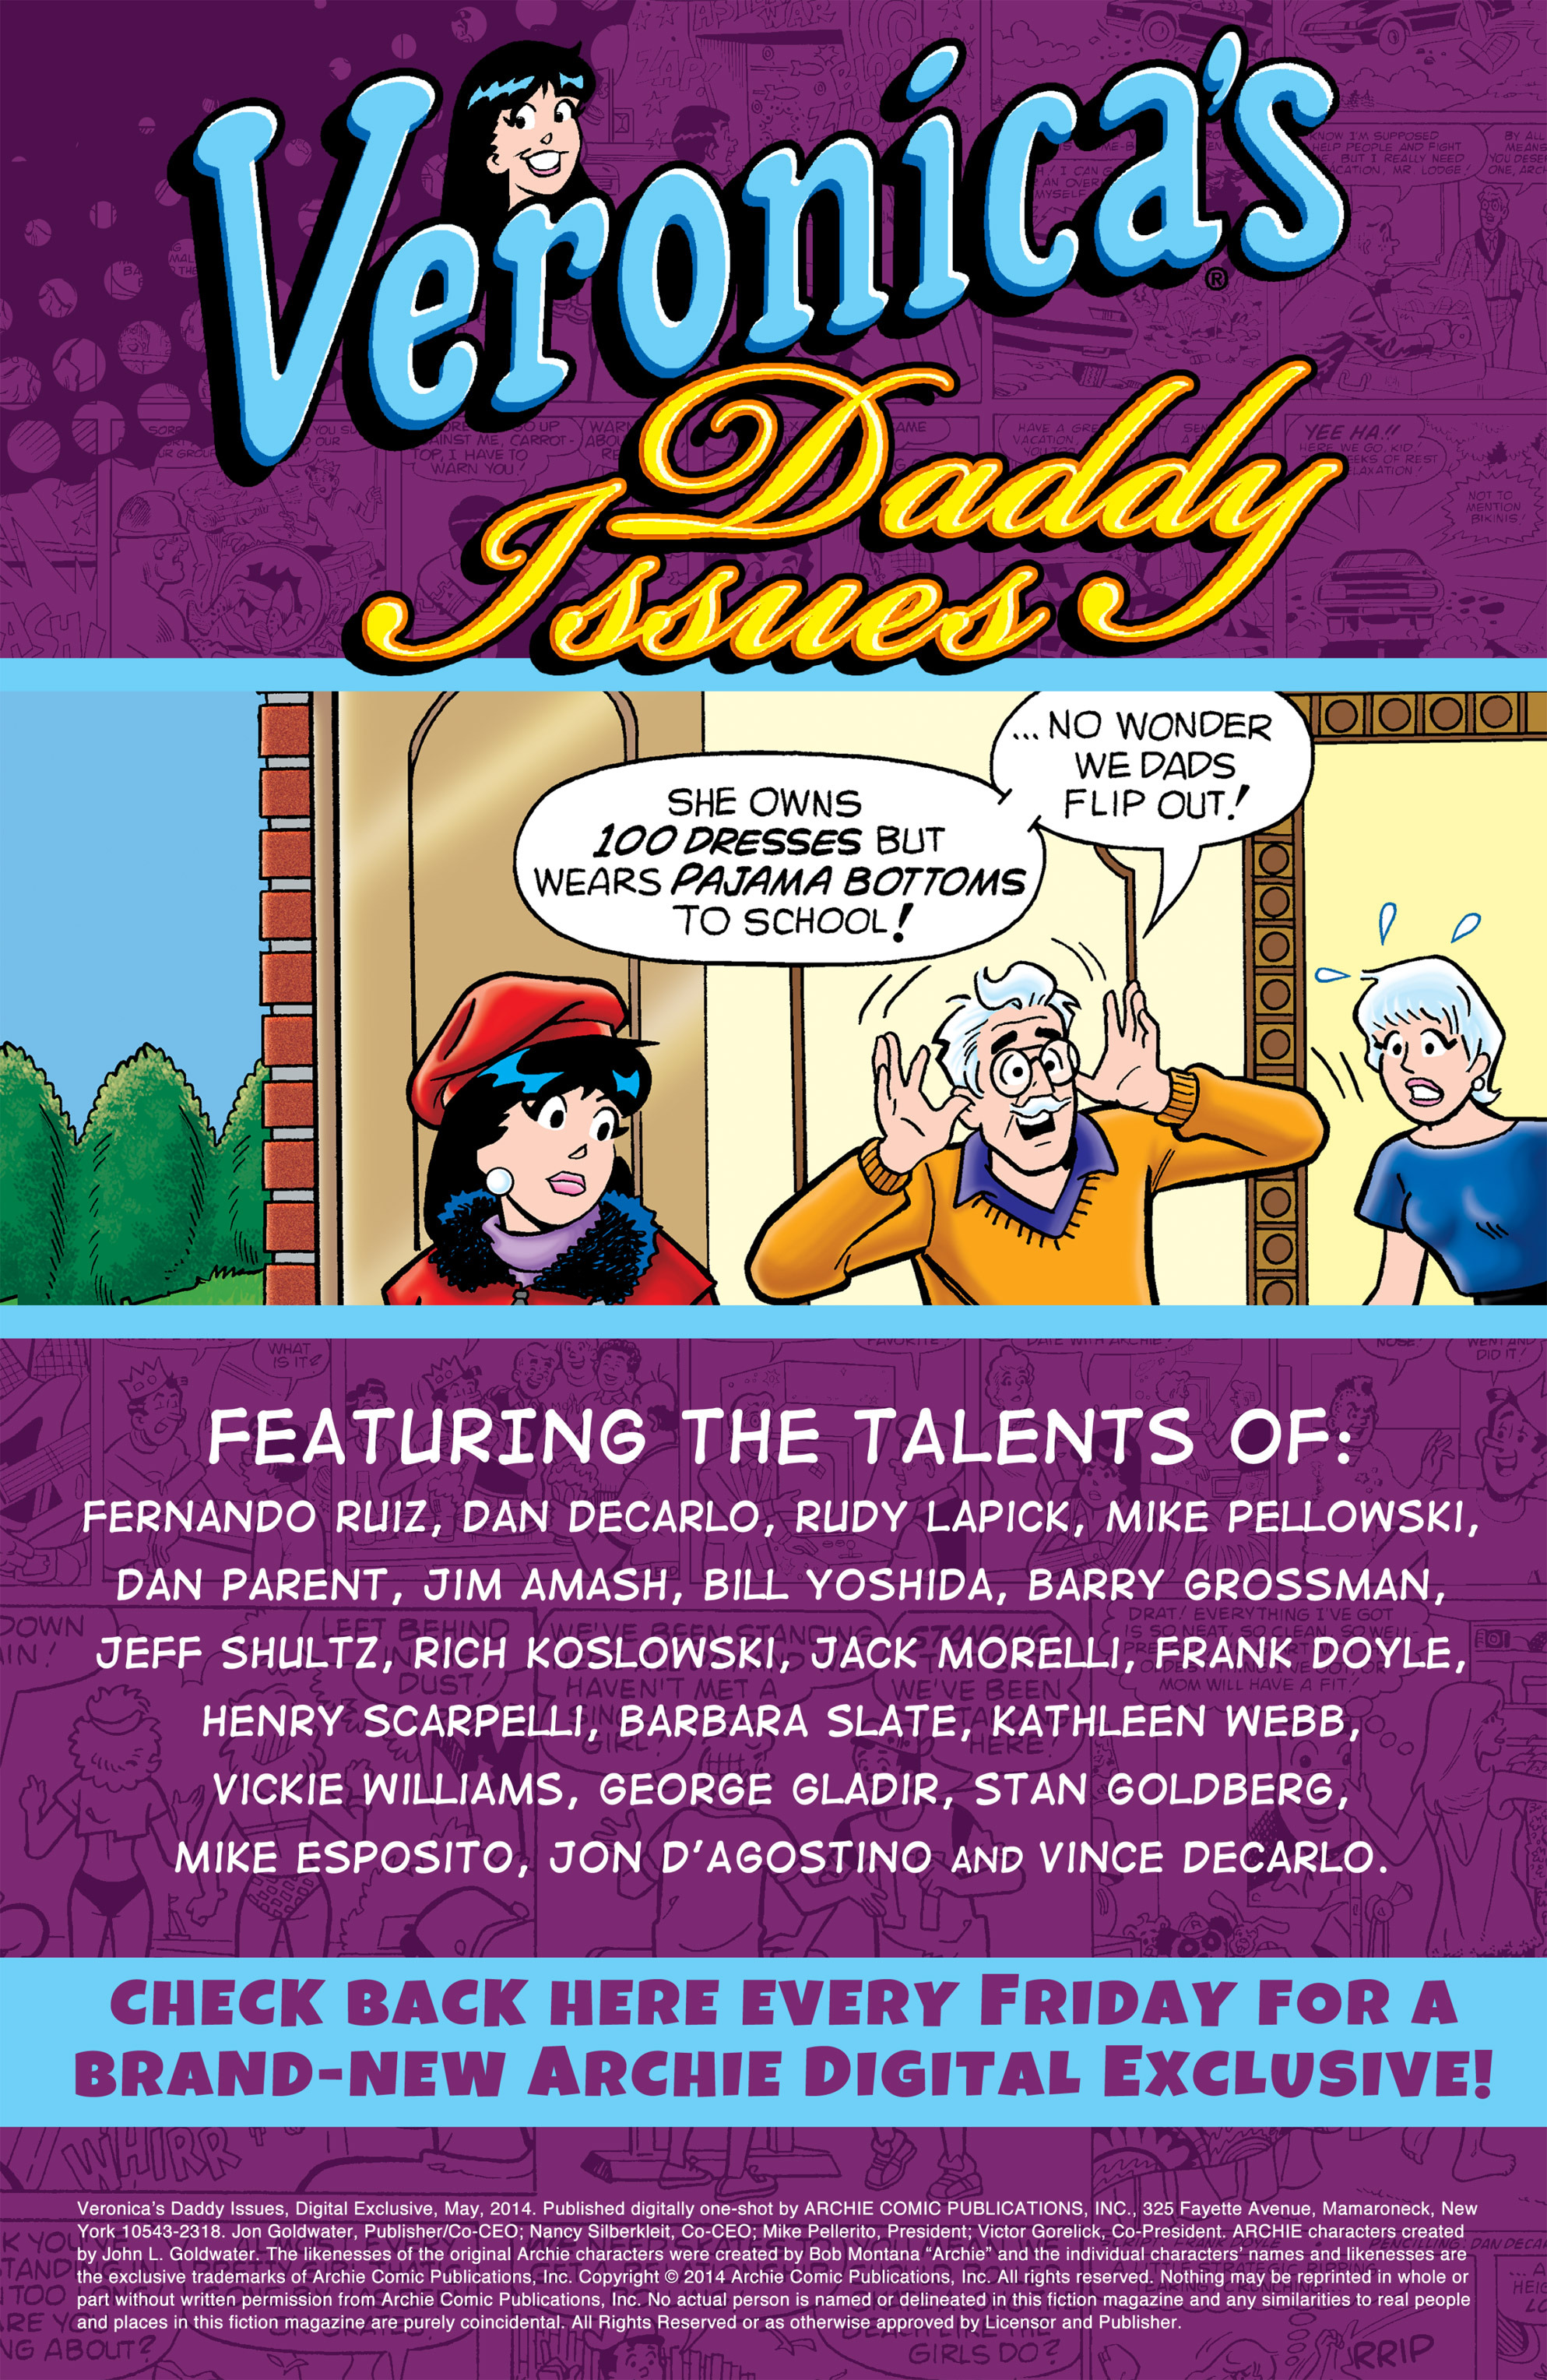 Read online Veronica's Daddy Issues comic -  Issue # TPB - 2